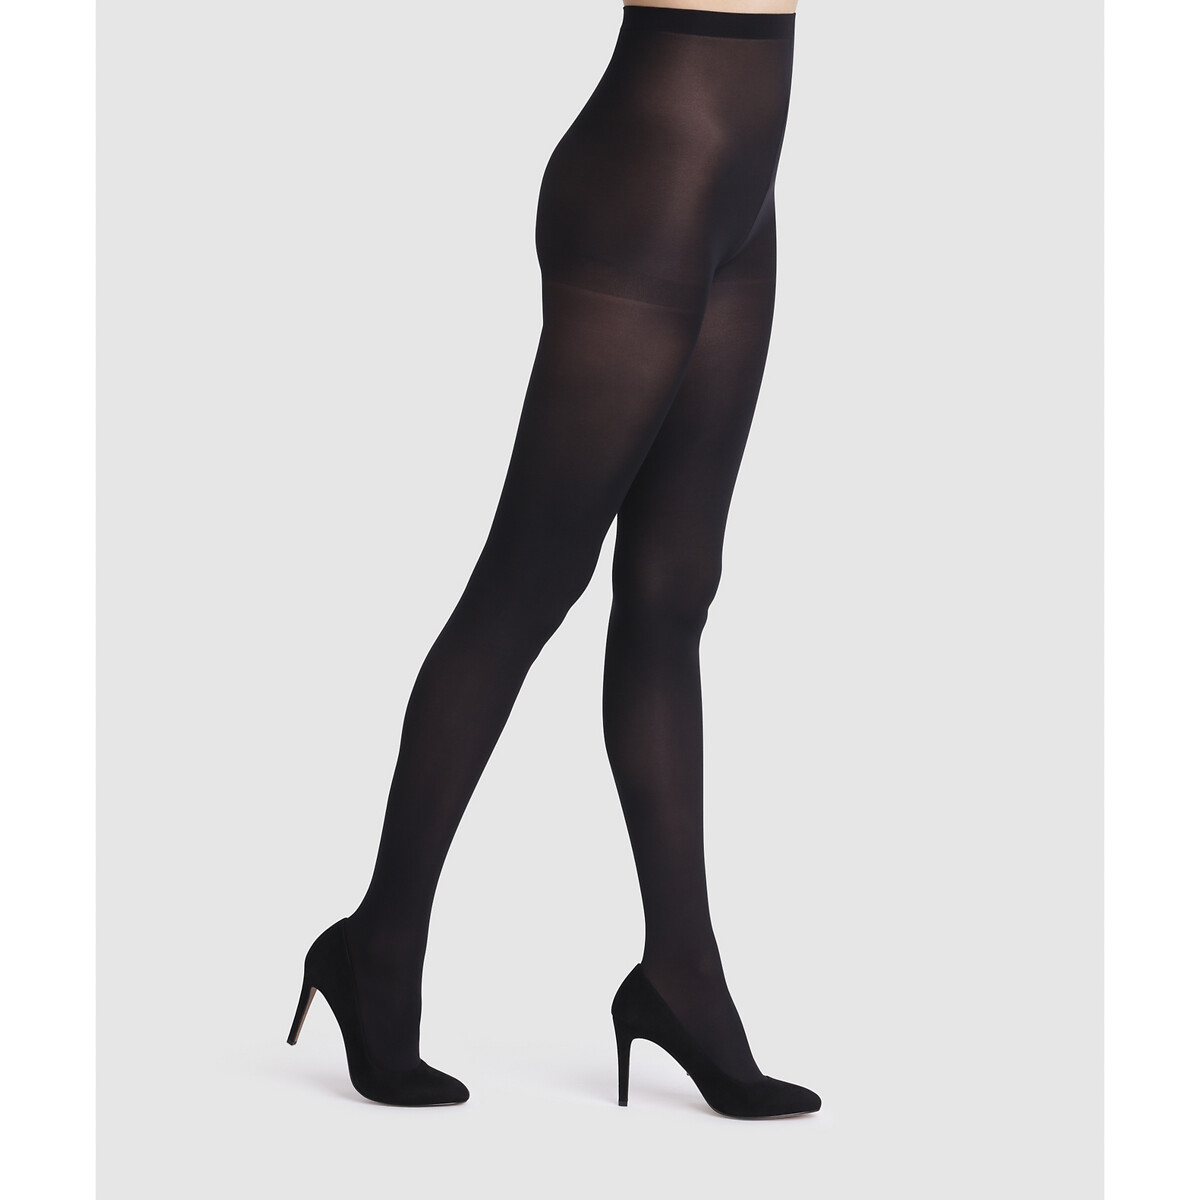 Pack of 2 Pairs of Beauty Resist 40 Denier Opaque Tights